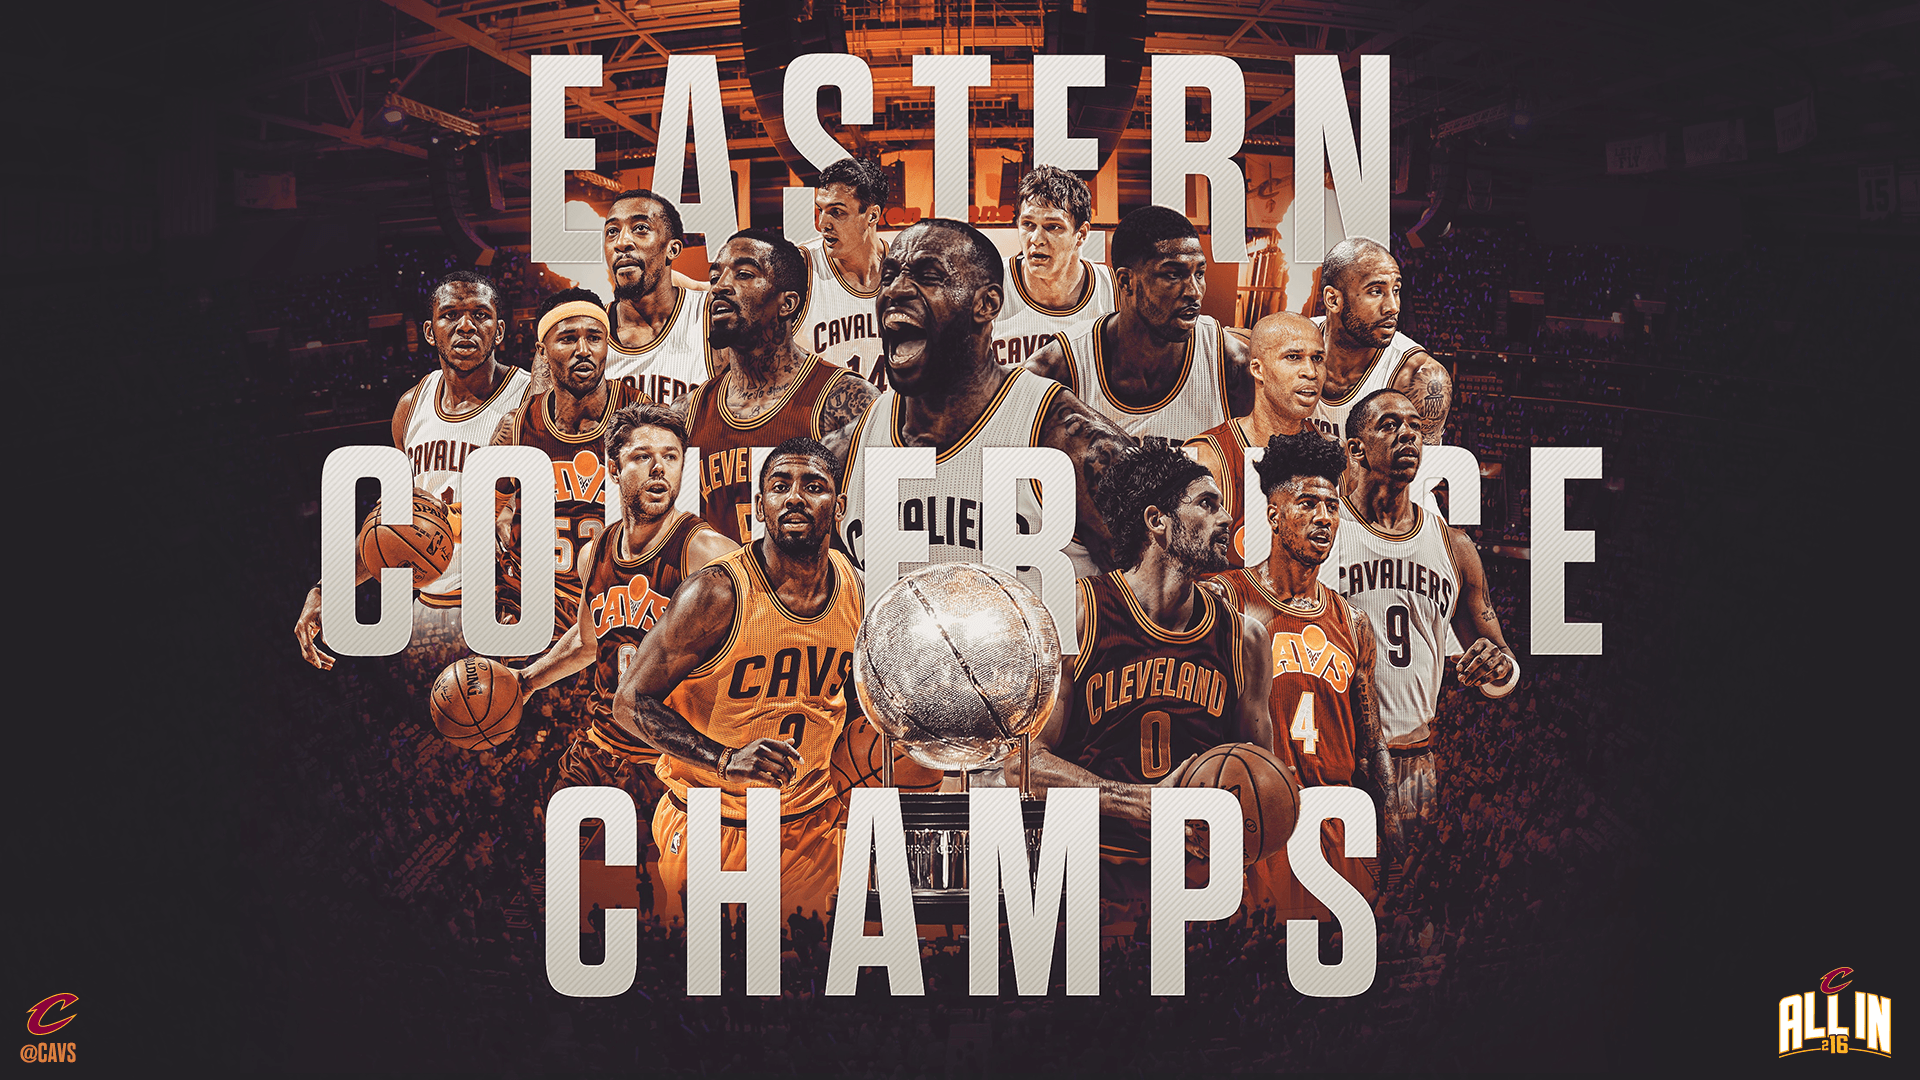 Photo Collection Cleveland Cavaliers Wallpaper Set